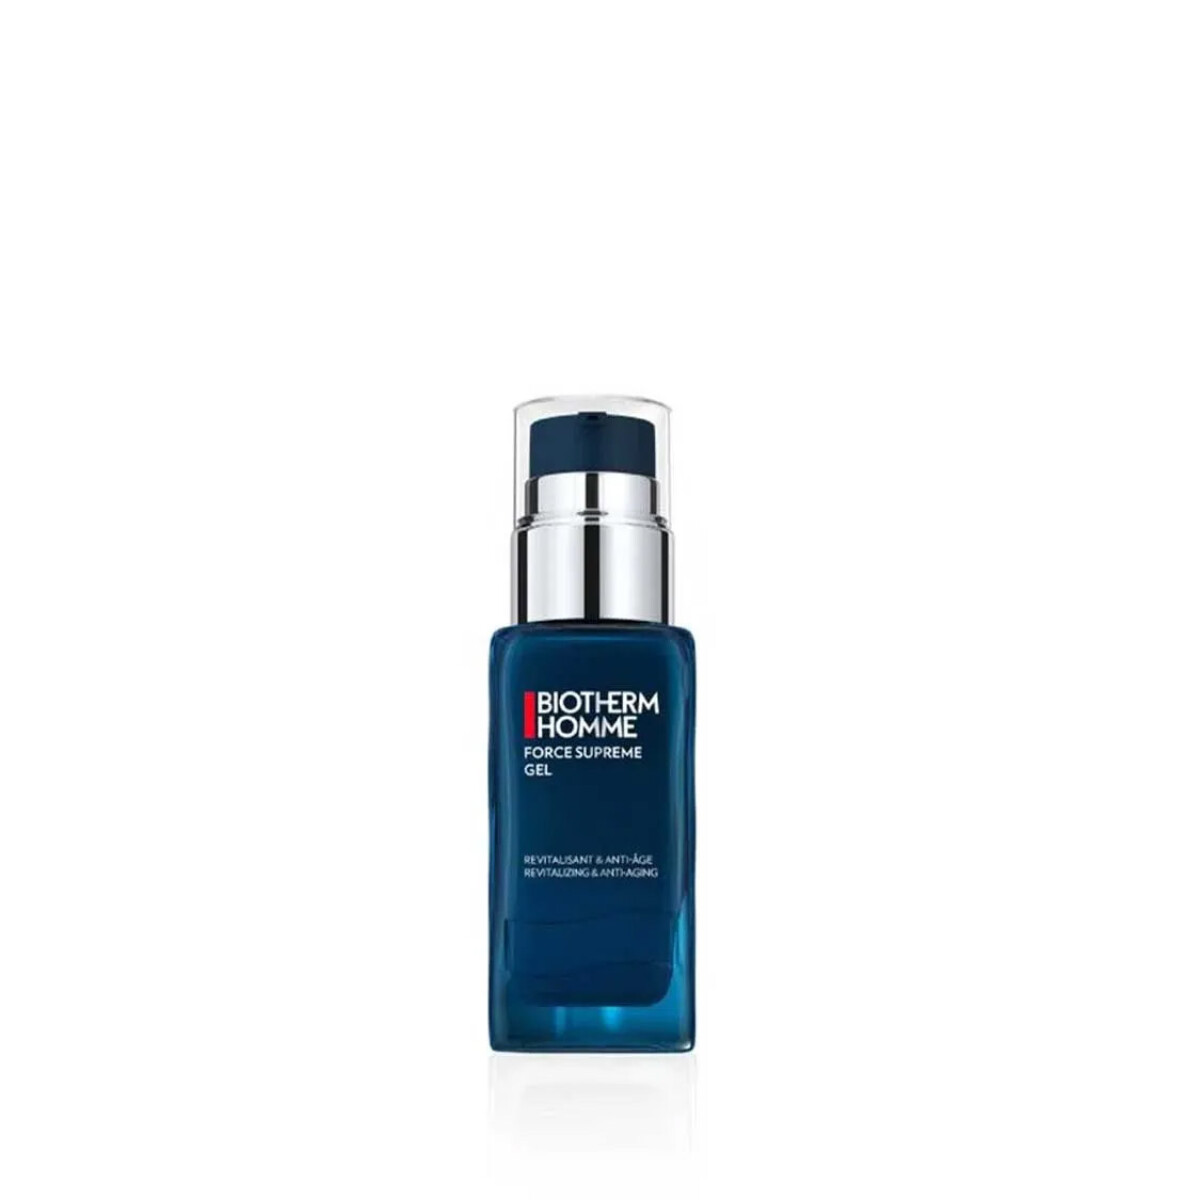 Biotherm Homme Force Supreme Gel F P 50M X 50 Ml 